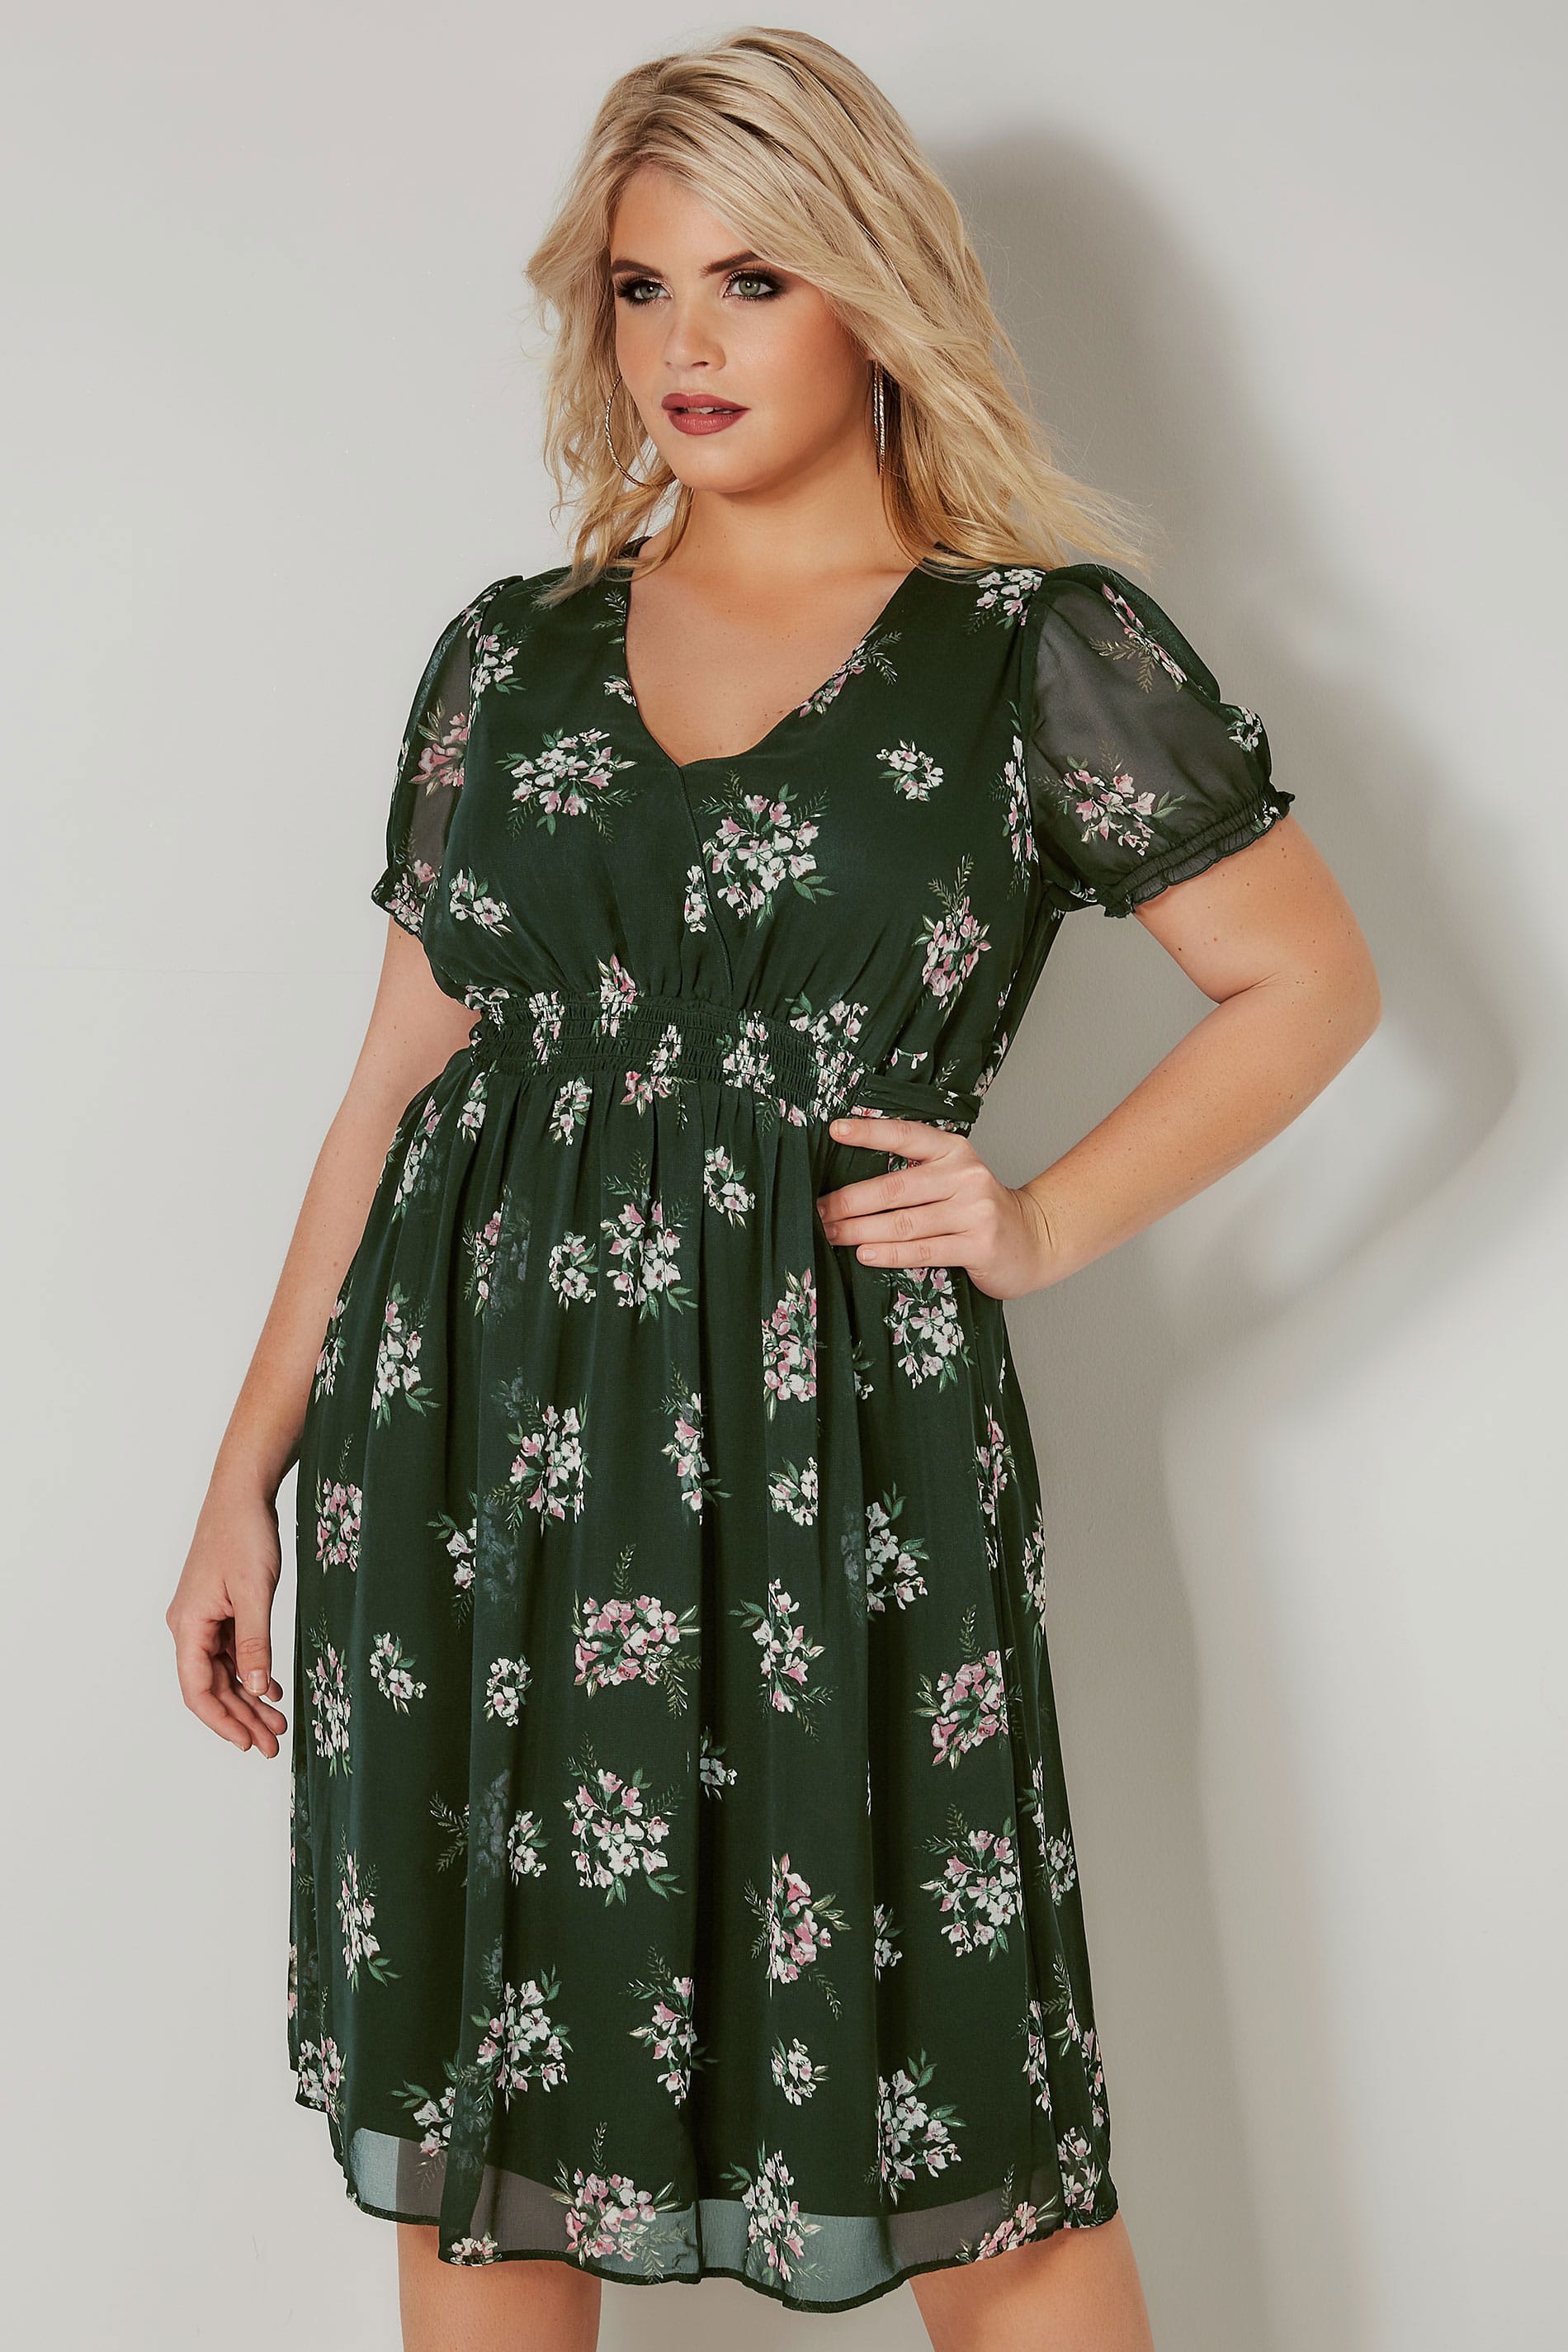 Green Floral Wrap Front Tea Dress With Waist Tie, plus size 16 to 36